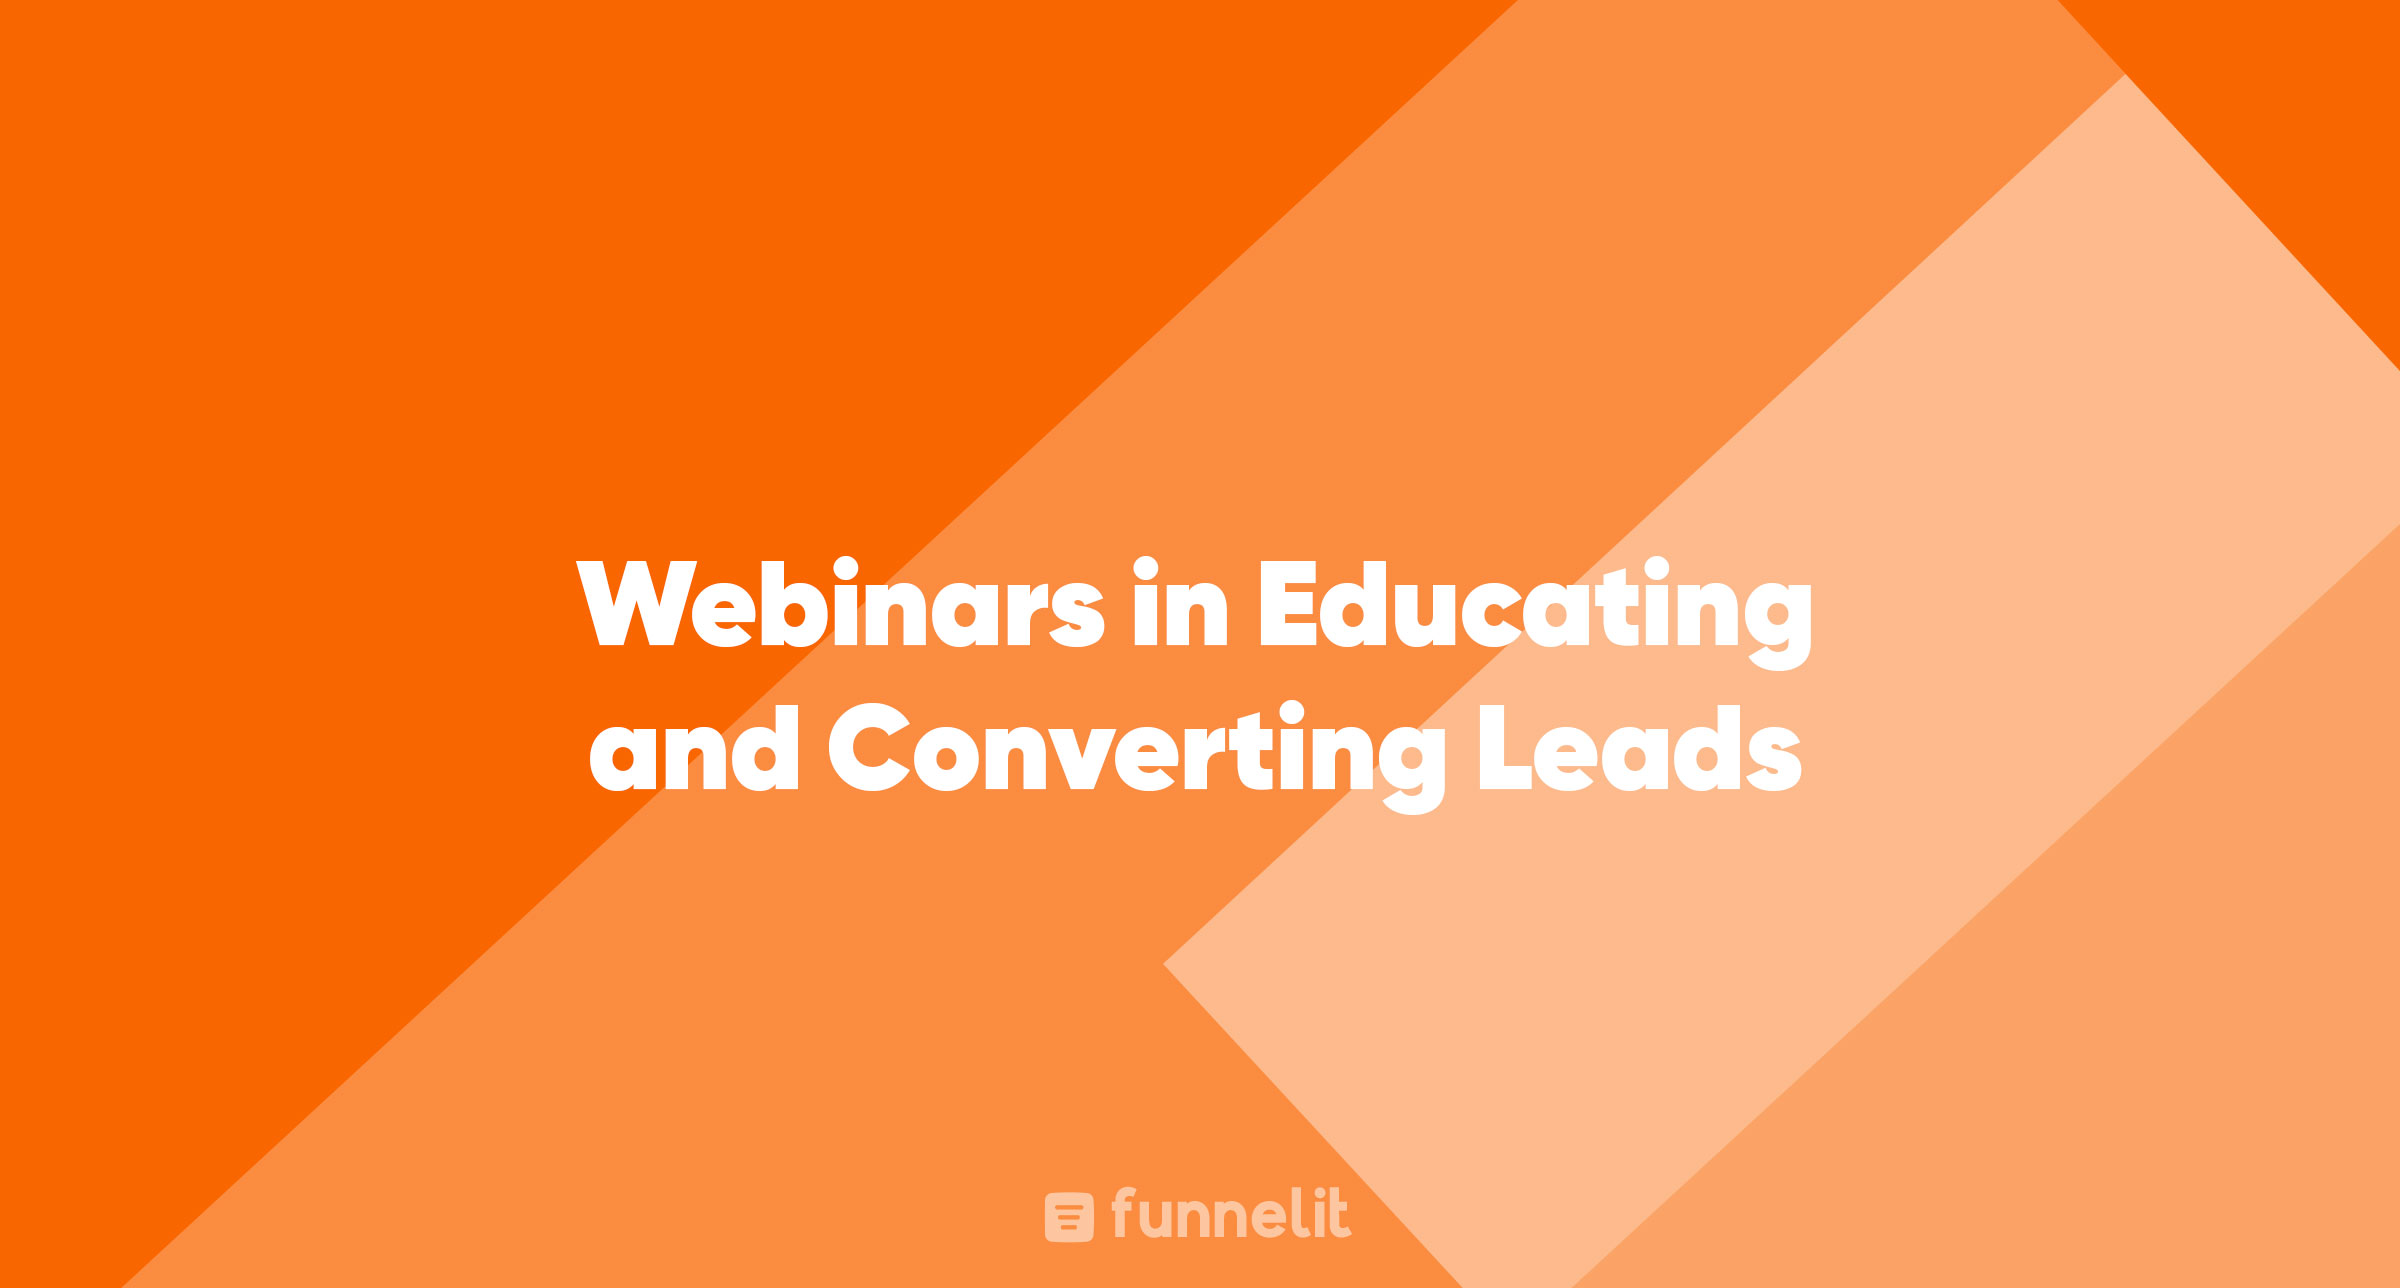 Article | Webinars in Educating and Converting Leads